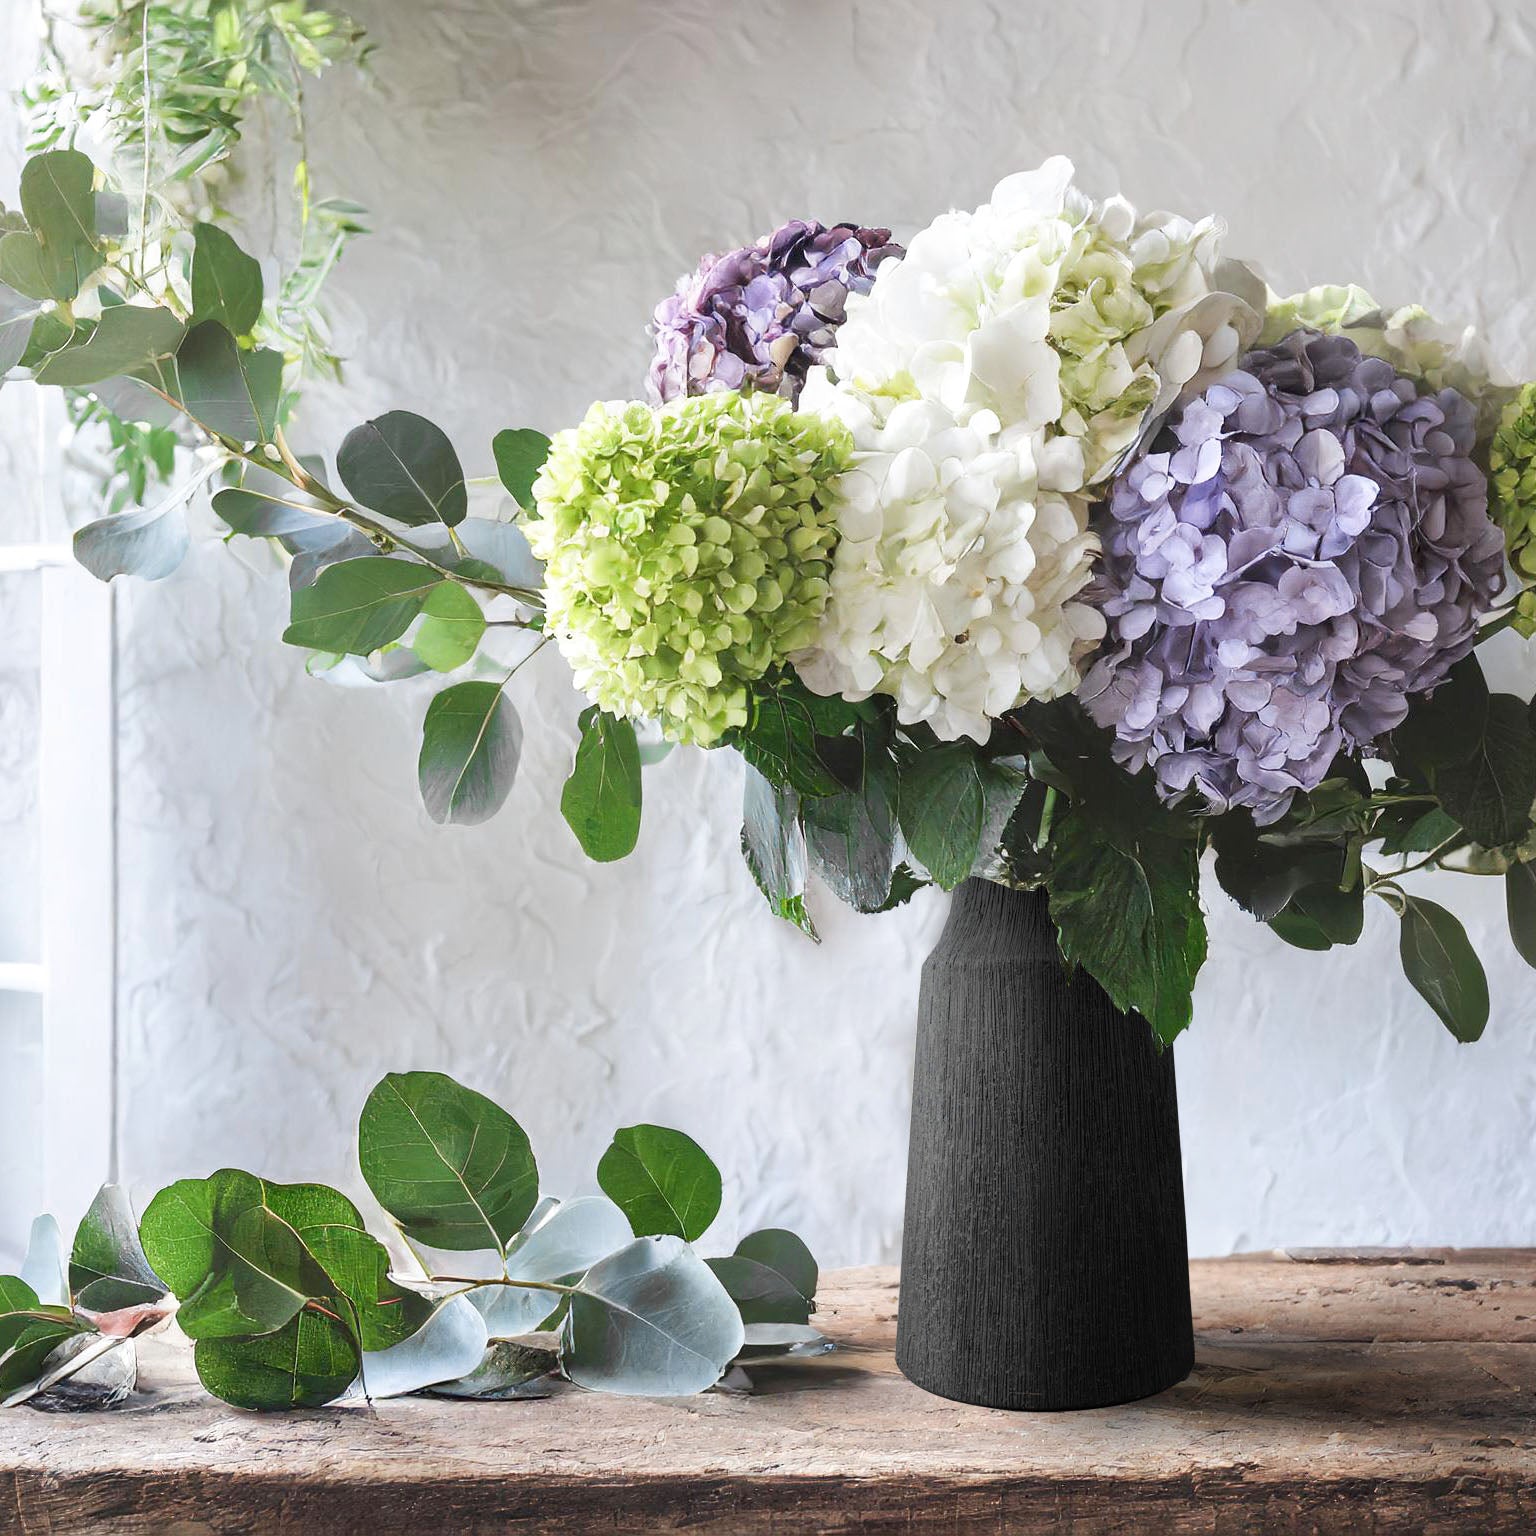 Matte black textured vase filled with flowers on wooden table in front of window.